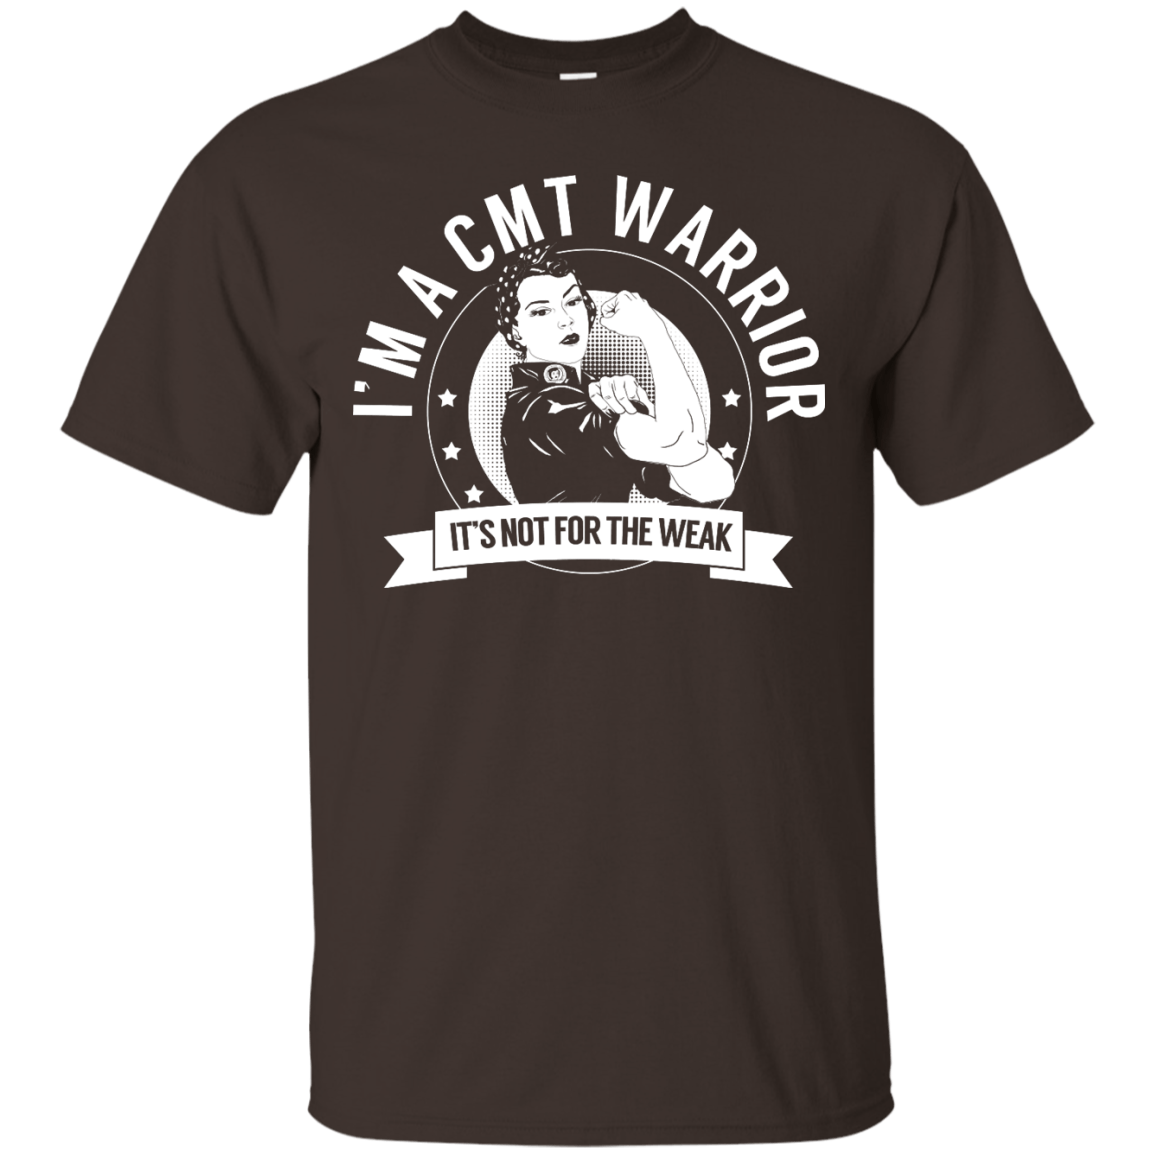 Charcot-Marie-Tooth Disease- CMT Warrior Not For The Weak Unisex Shirt - The Unchargeables